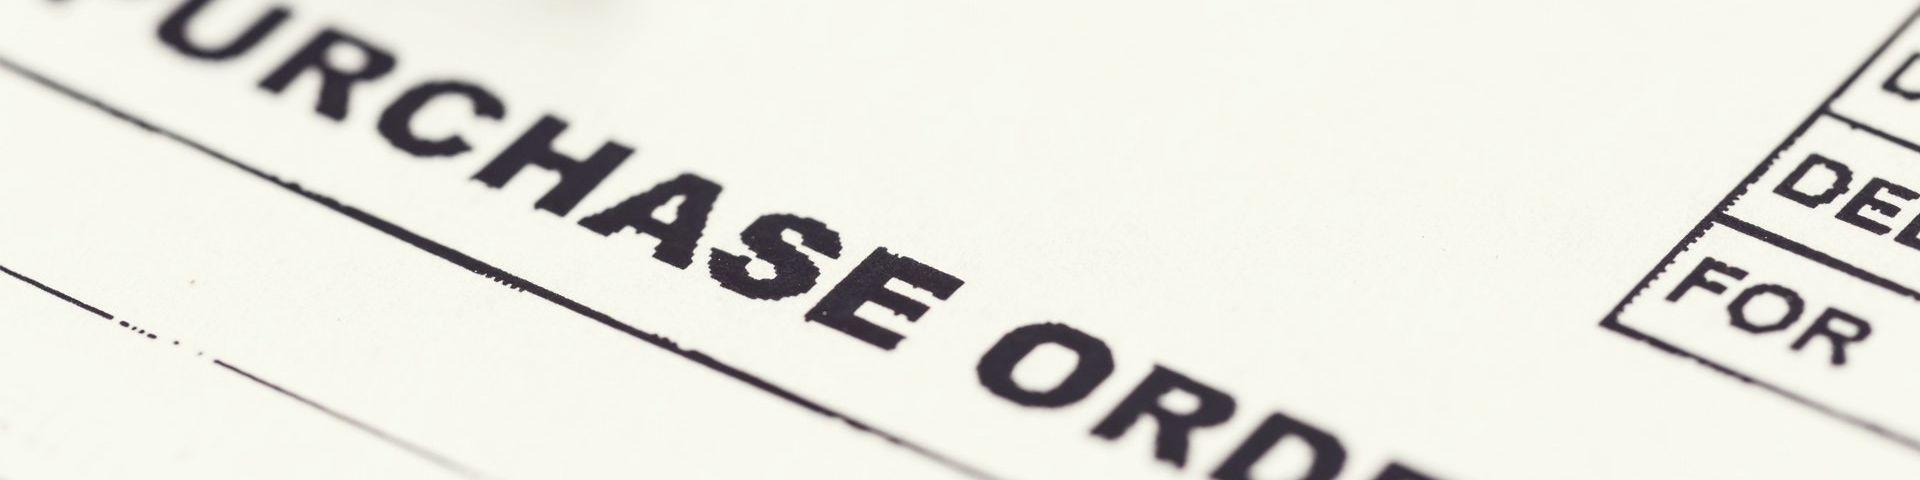 A form with ‘PURCHASE ORDER’ printed across it.